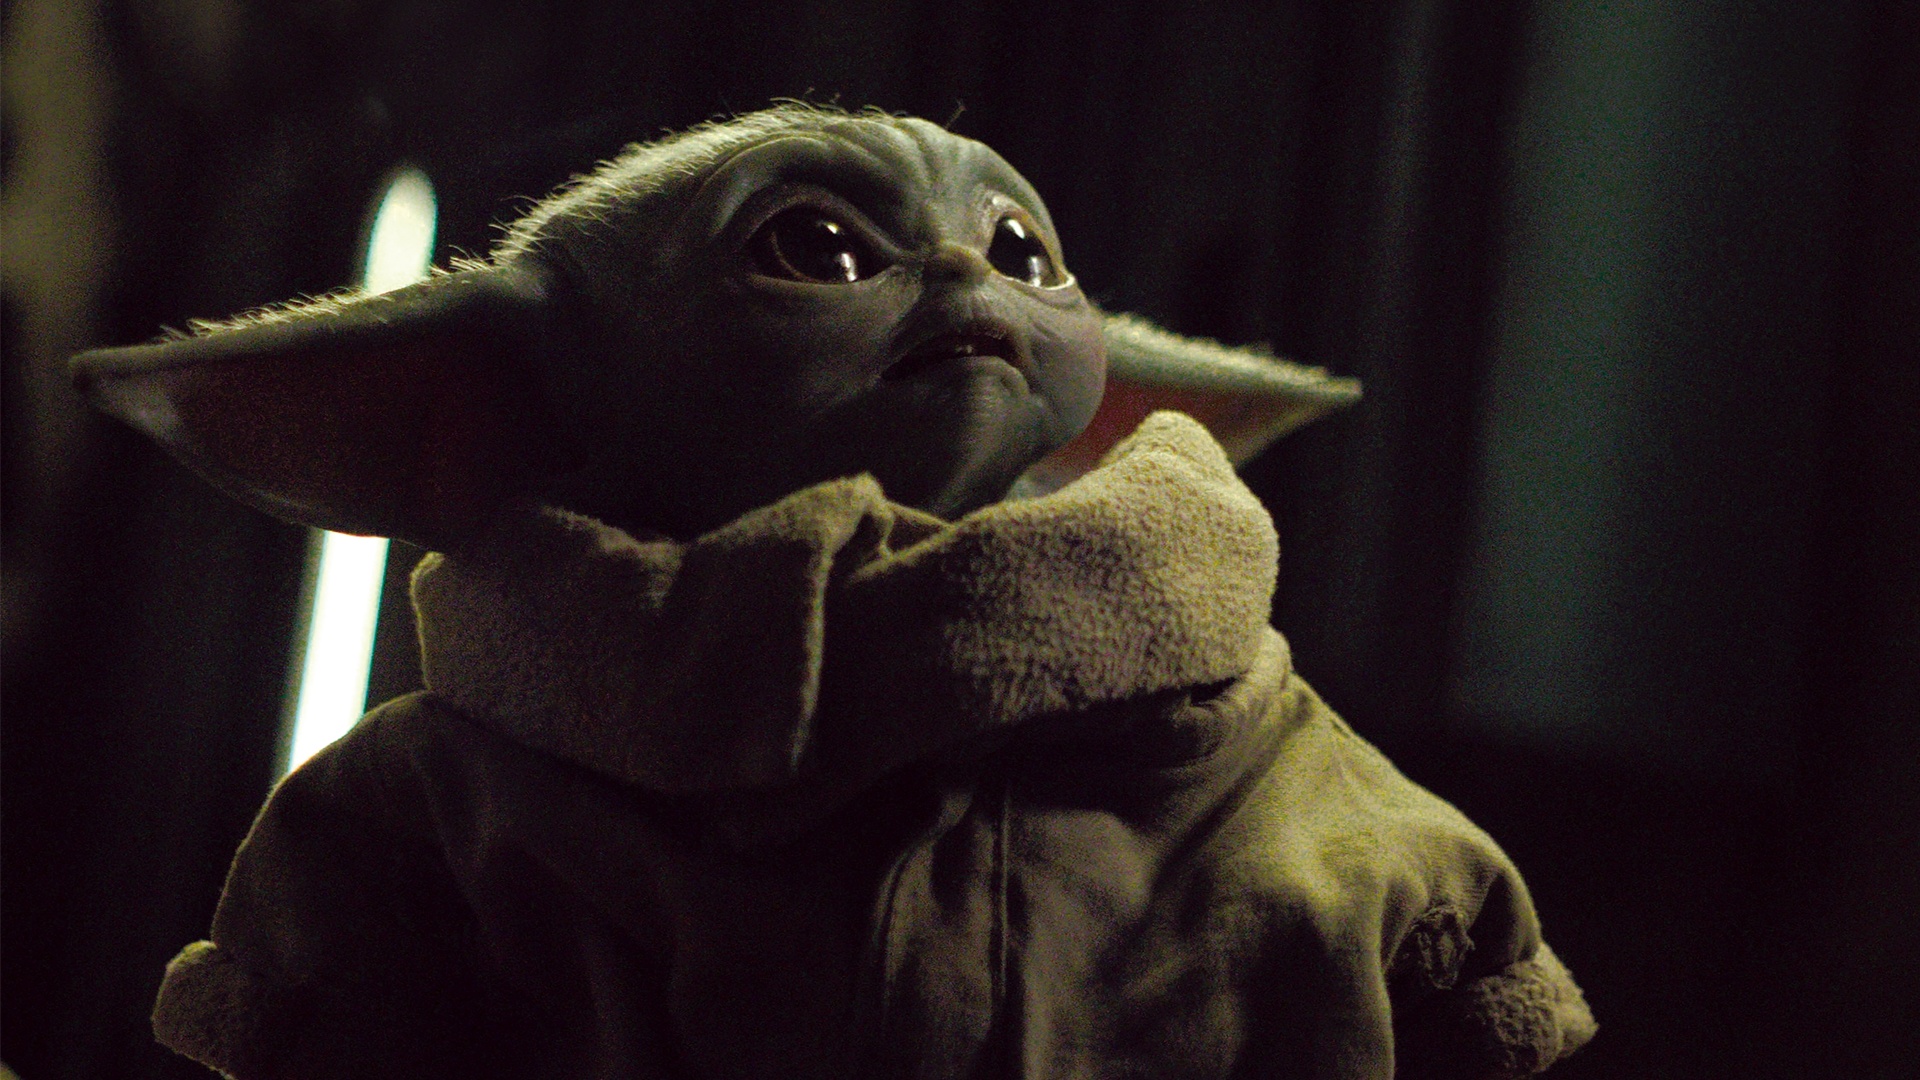 What Is Baby Yoda?